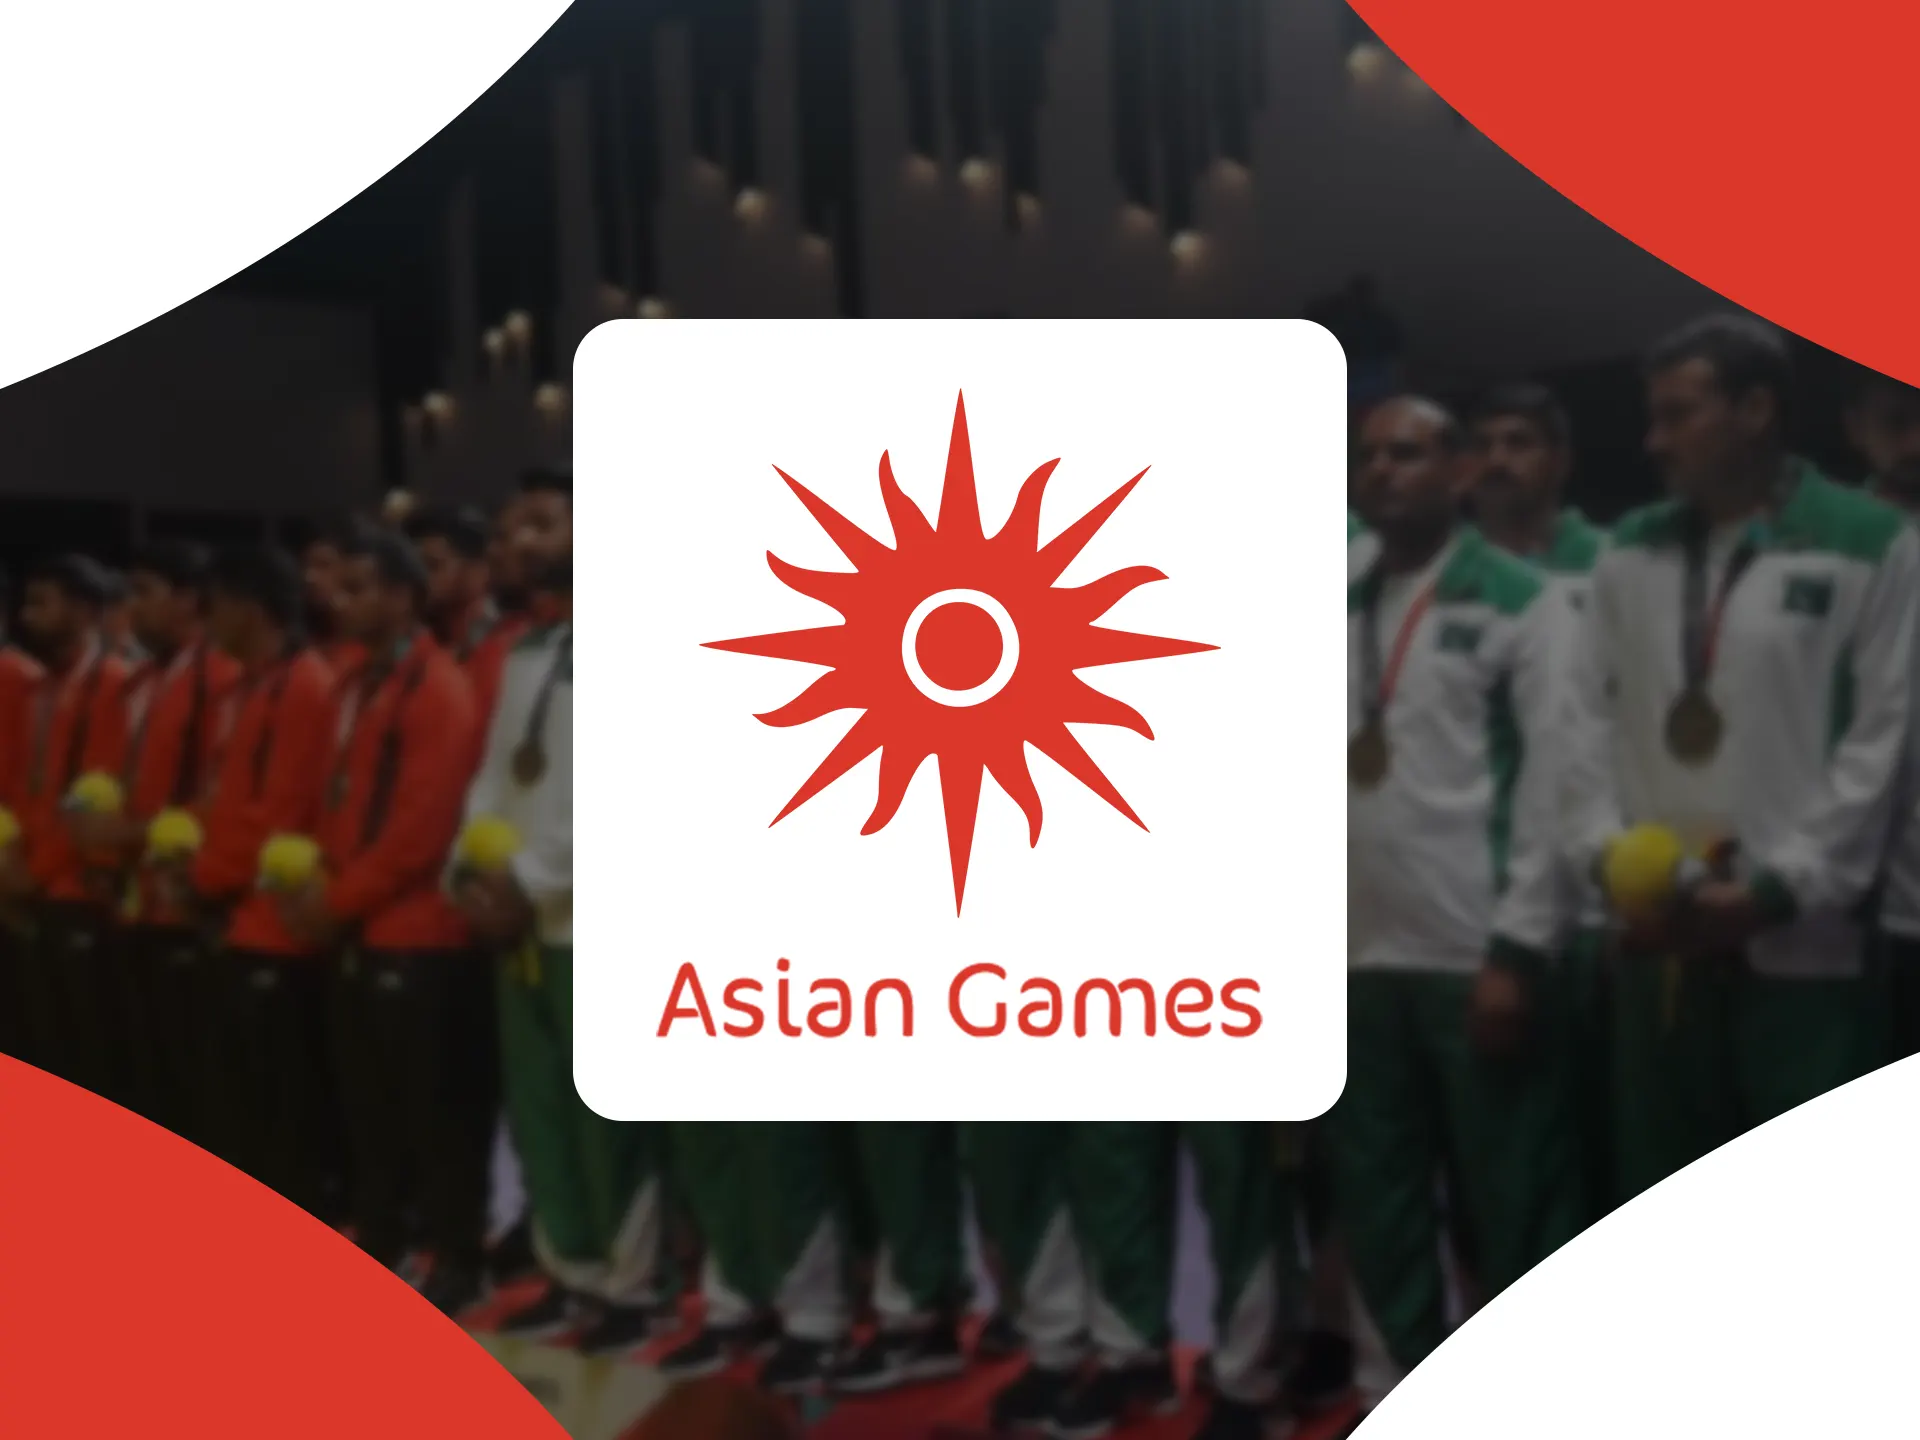 Make bets on your favorite team in the Asian Games tournament.